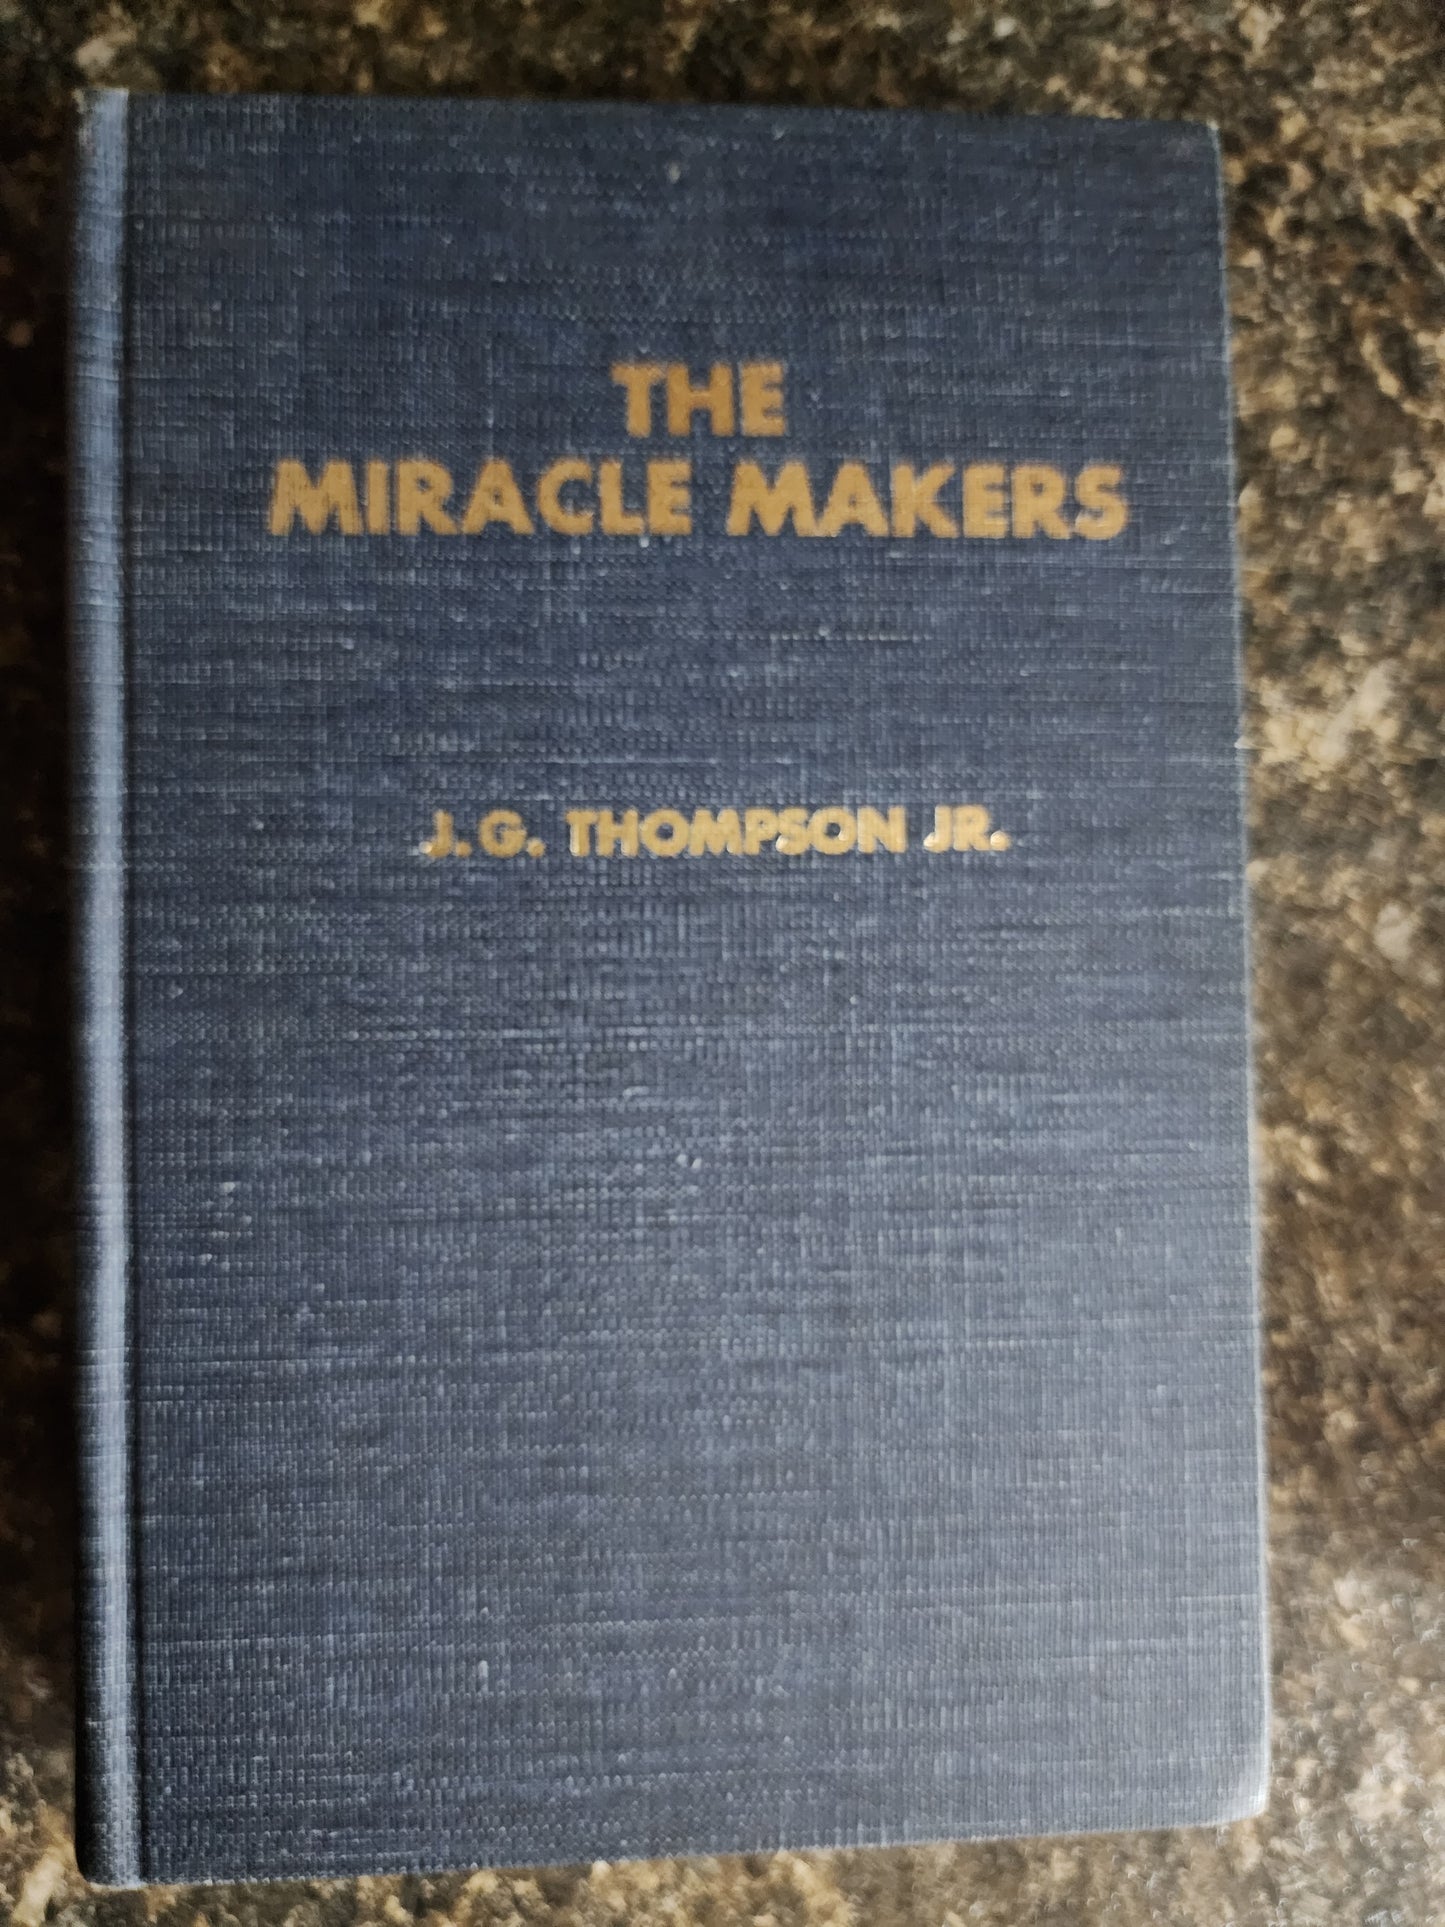 The Miracle Makers - J.G. Thompson Jr.